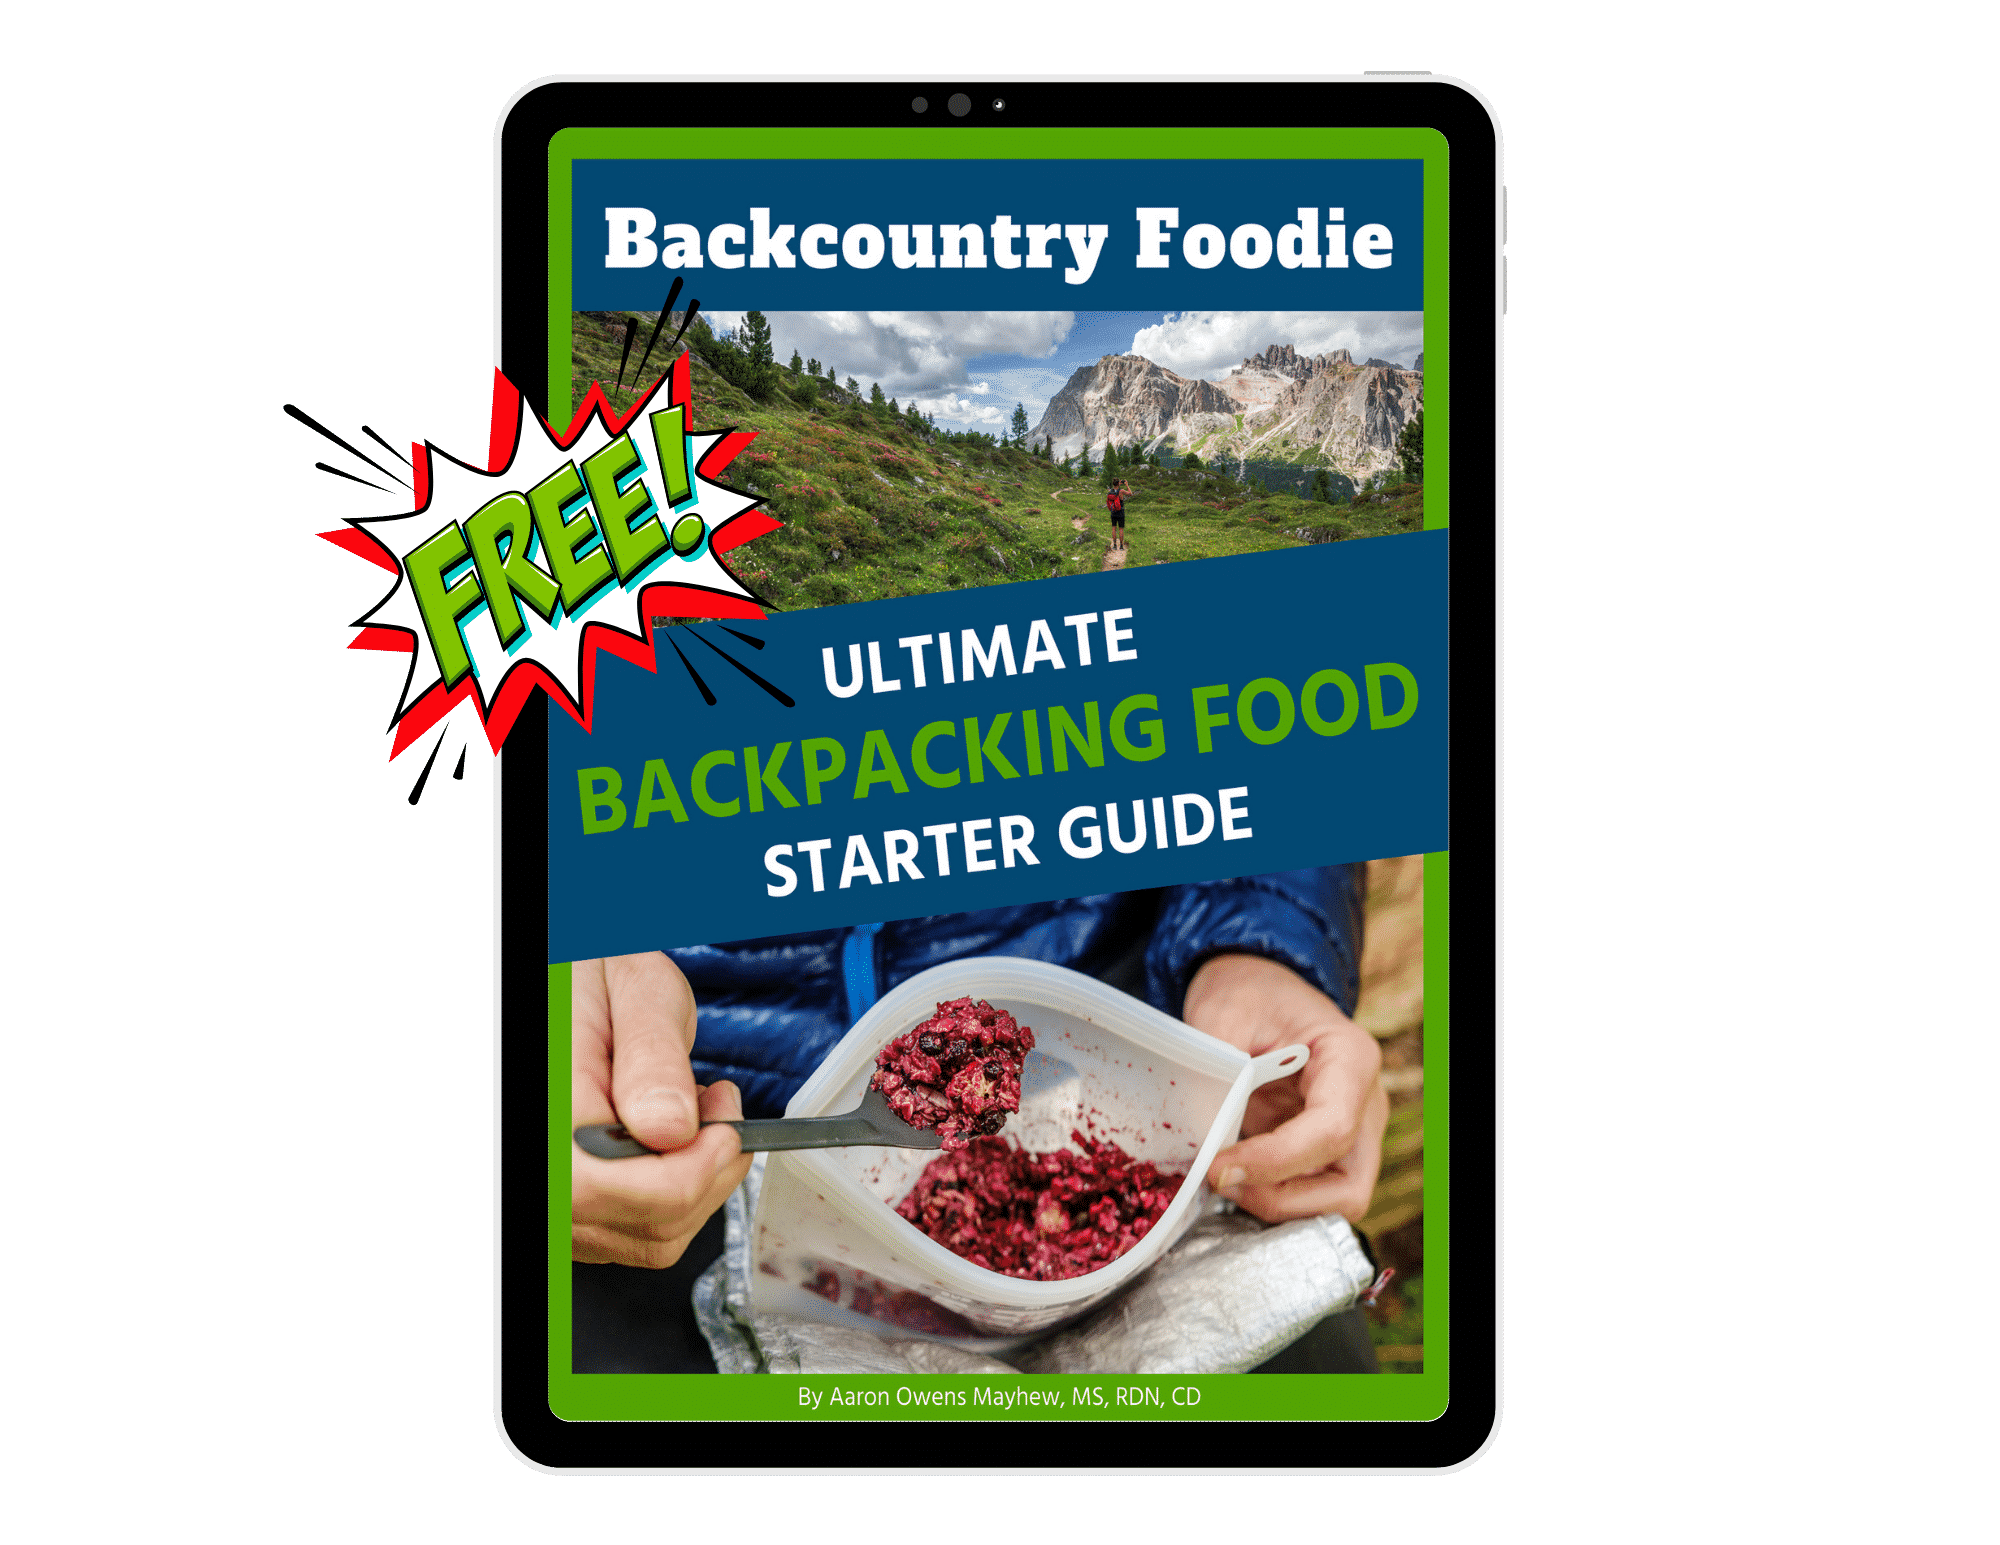 Backcountry Foodie Ultimate Backpacking Food Starter Guide Free Download